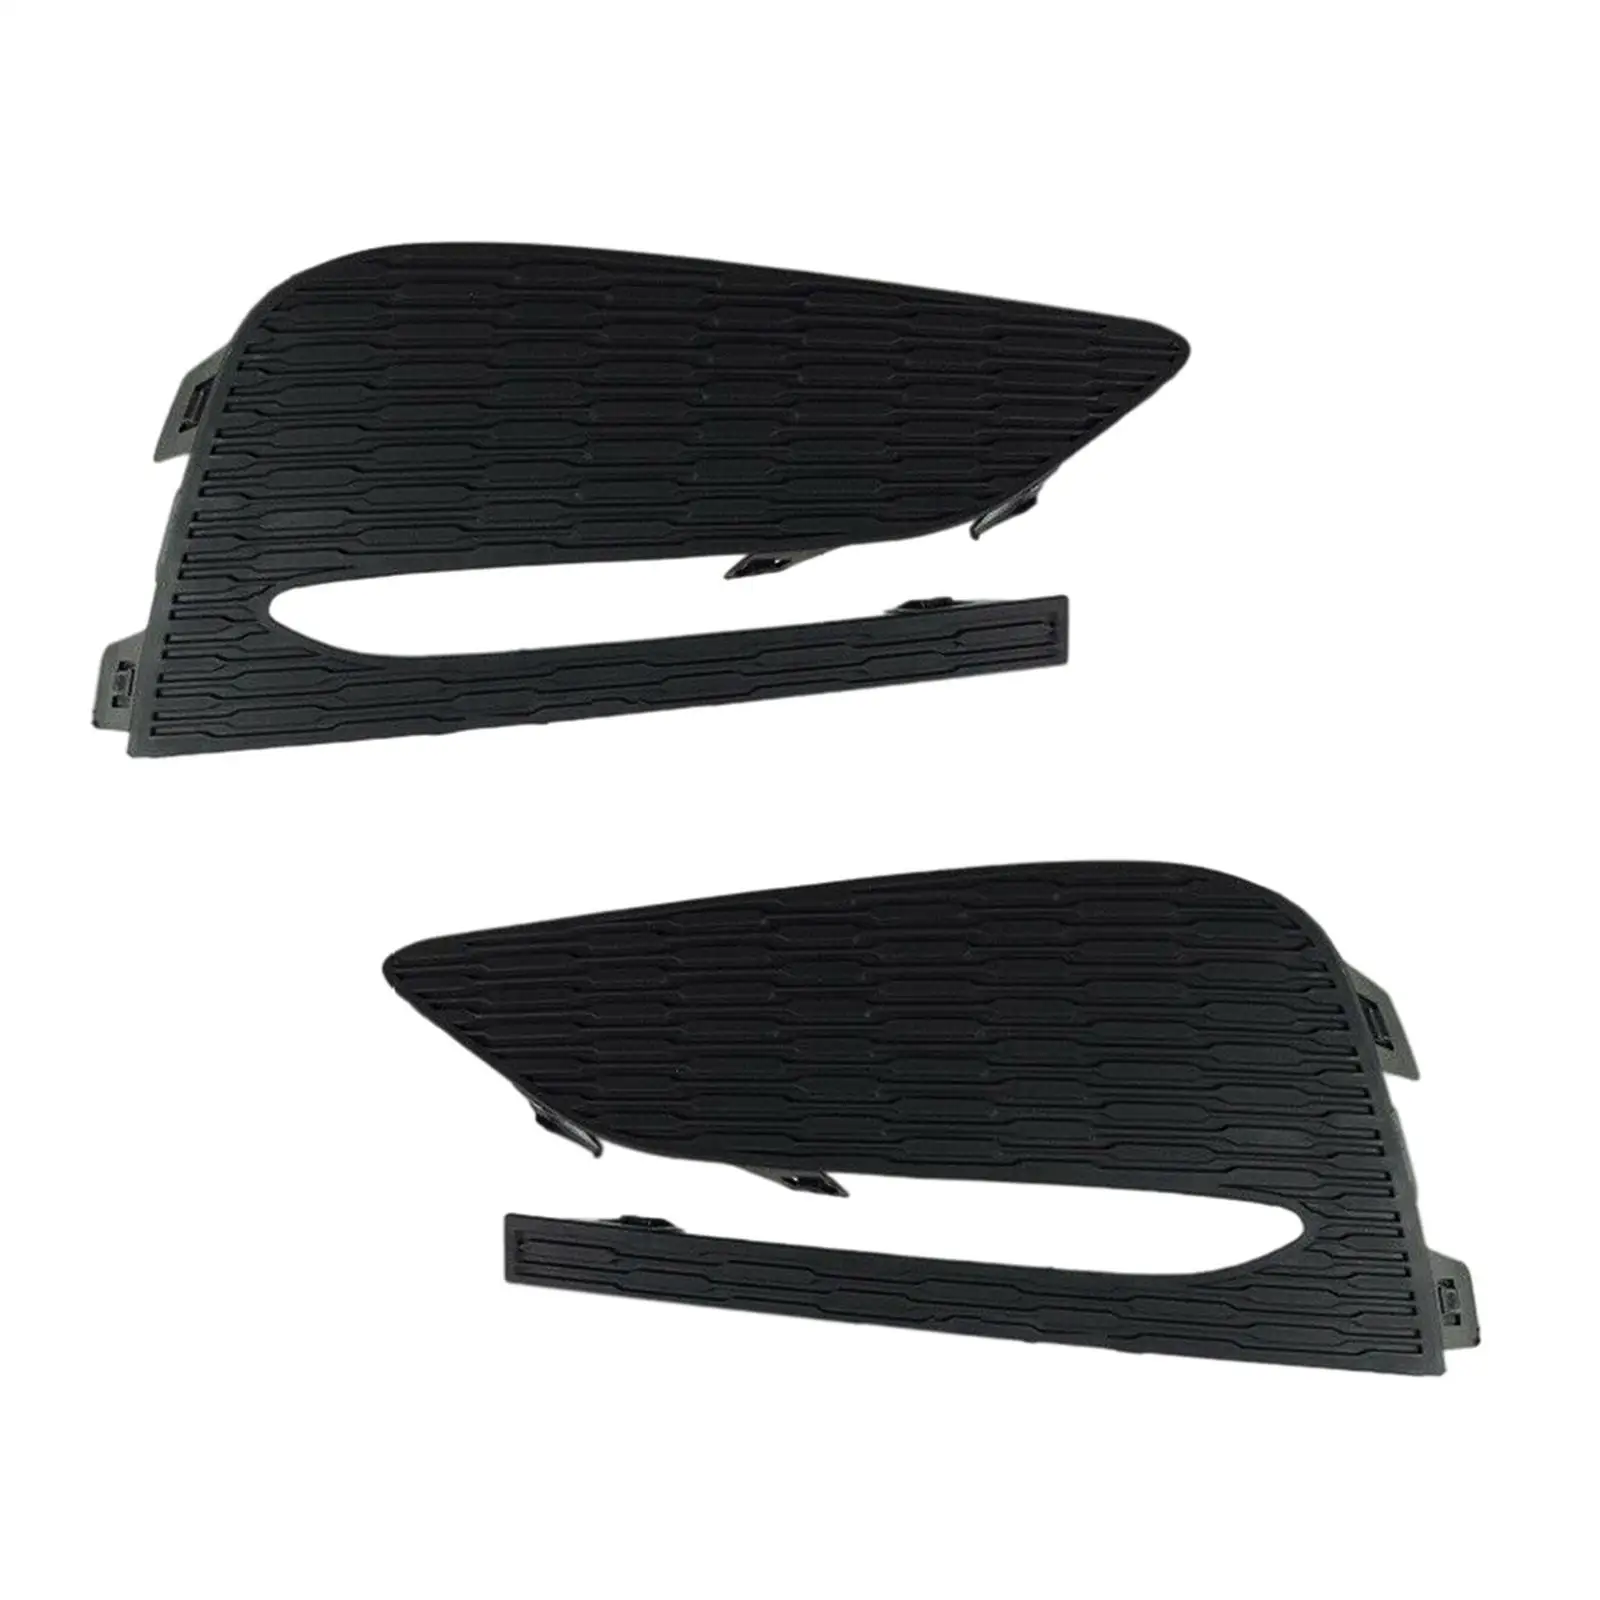 2Pcs Front Fog Light Cover Replaces Left Right for 2016 2017 2018 Car Accessories Durable